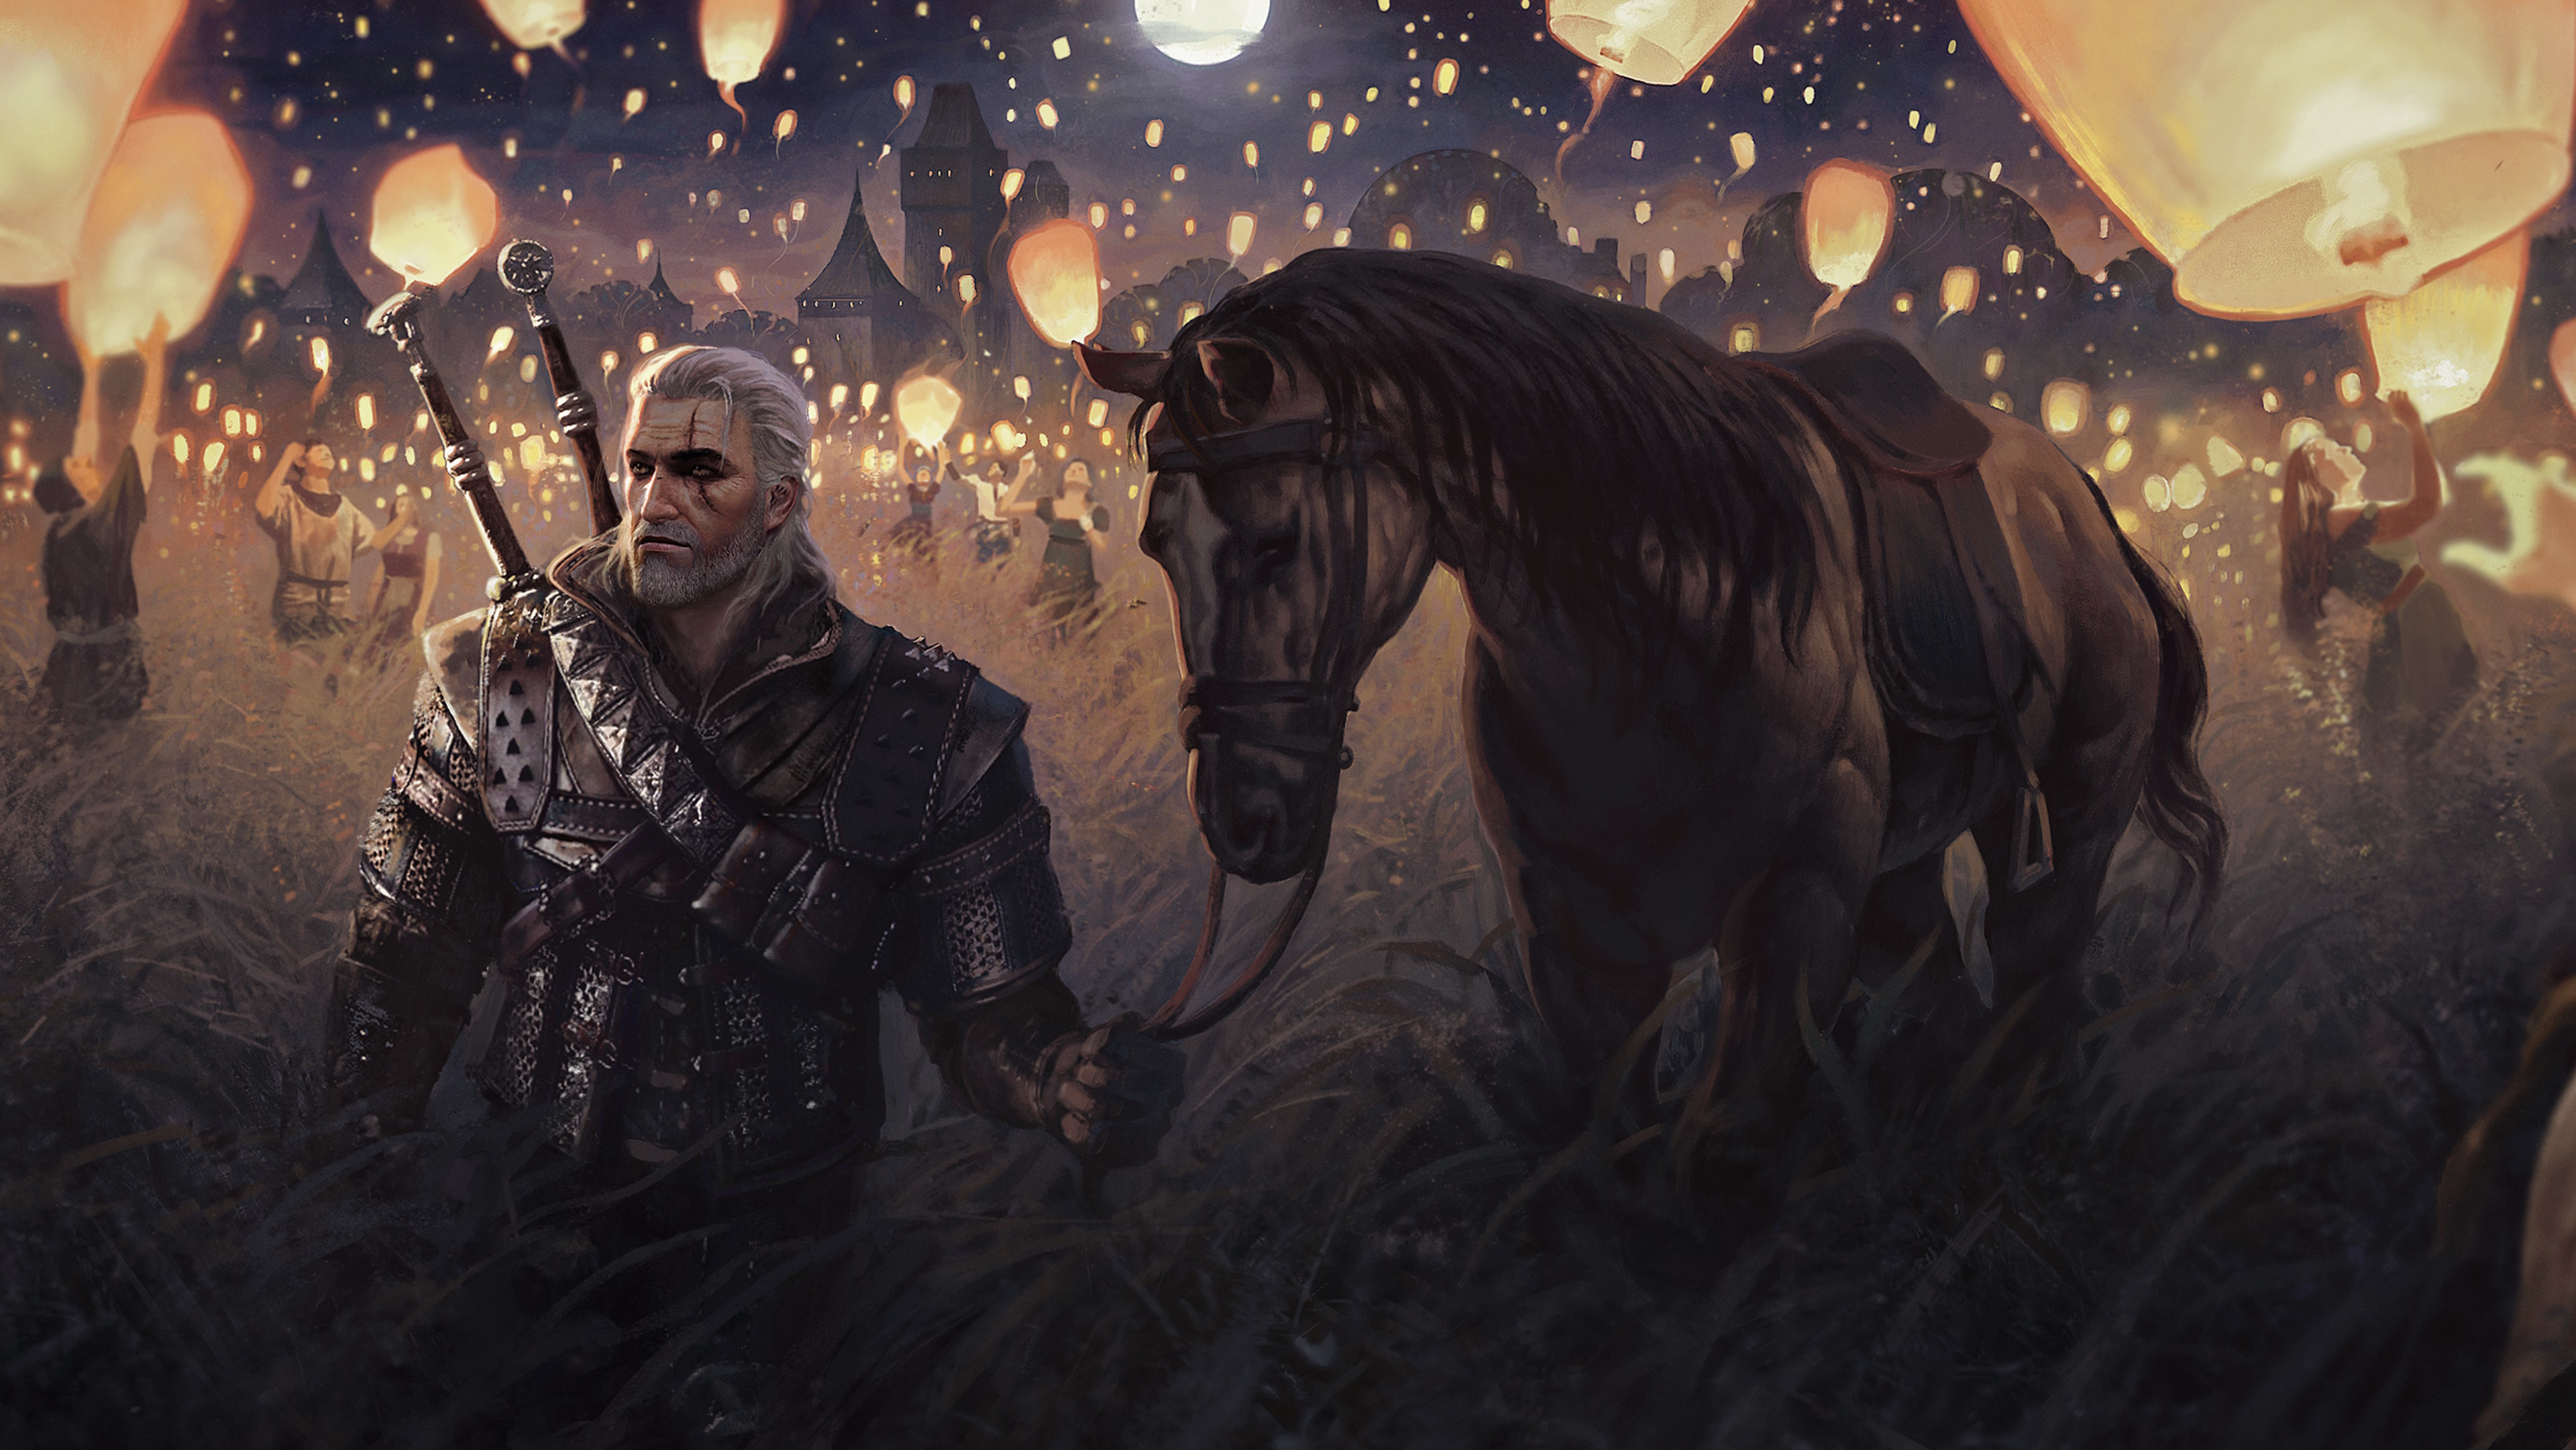  You can now pet Geralt's horse in The Witcher 3, and it's about time 